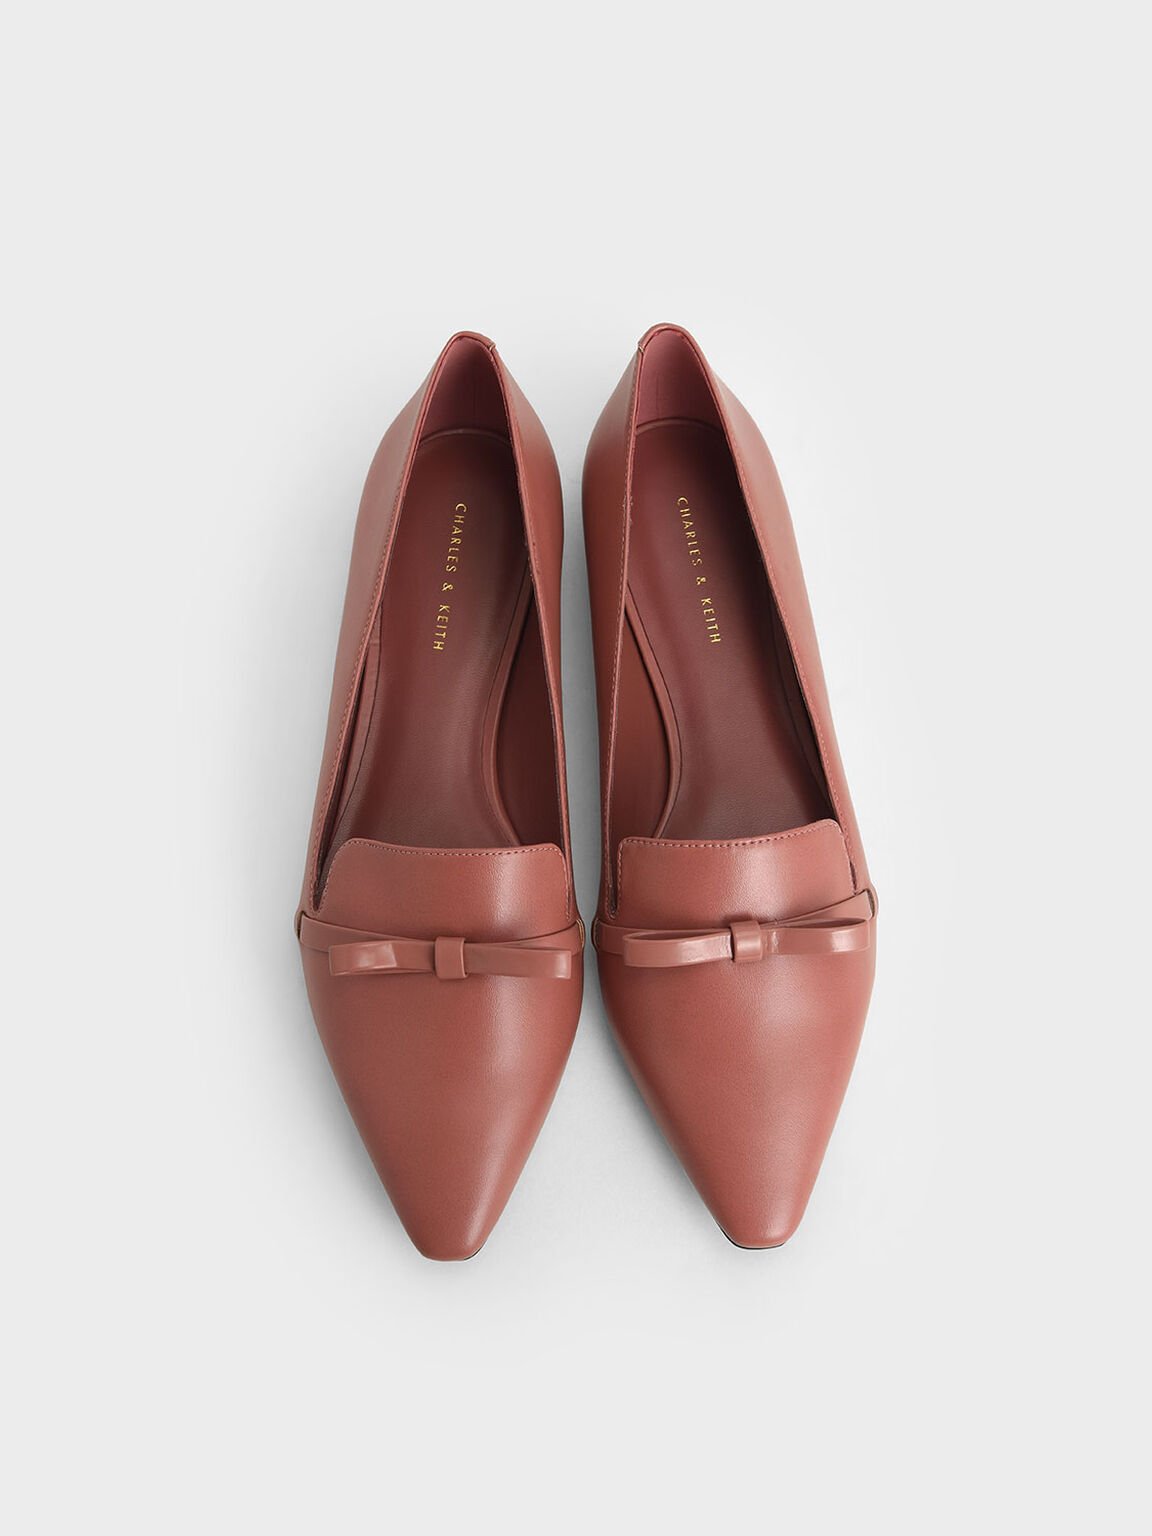 Bow Tie Loafers, Pink, hi-res